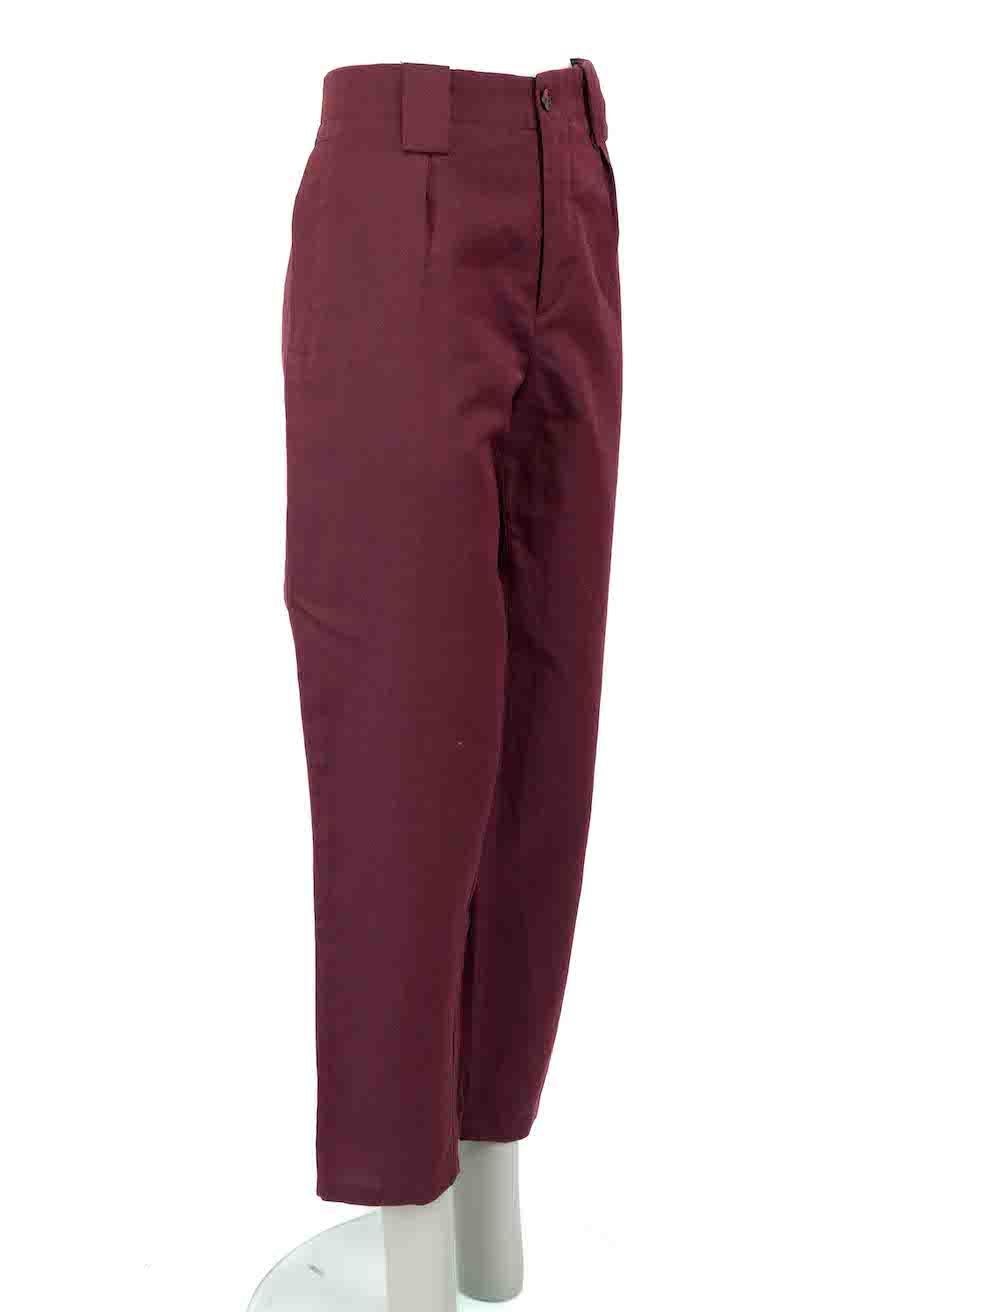 CONDITION is Very good. Hardly any visible wear to trousers is evident on this used Etro designer resale item.

Details
Burgundy
Linen
Tapered trousers
High rise
Front zip closure with buttons
Belt hoops
2x Front side pockets
2x Back pockets
Made in